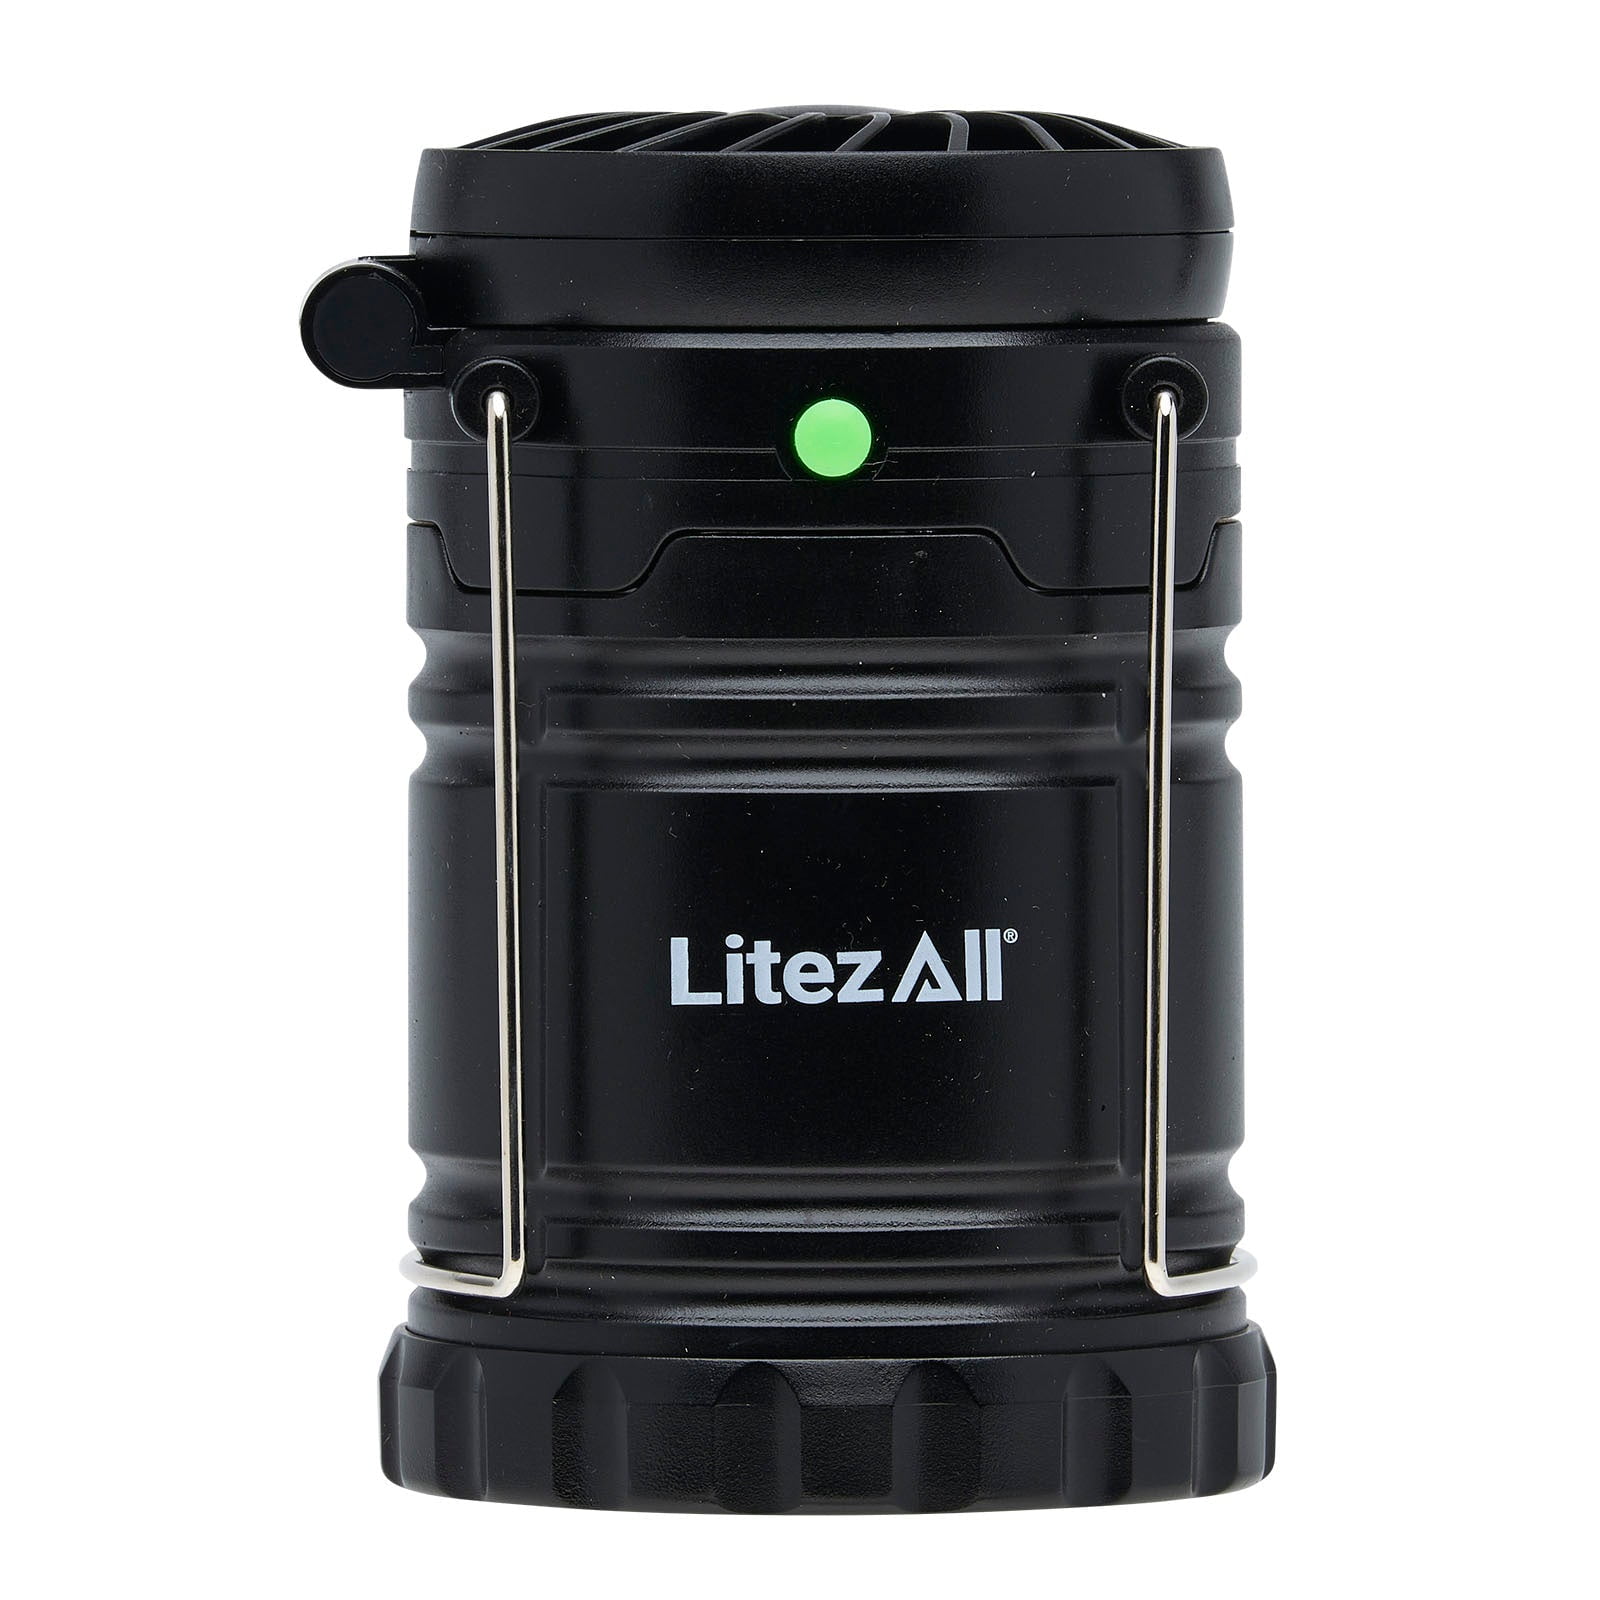 Portable LED Camping Lantern and Fan – Find Winning Deals